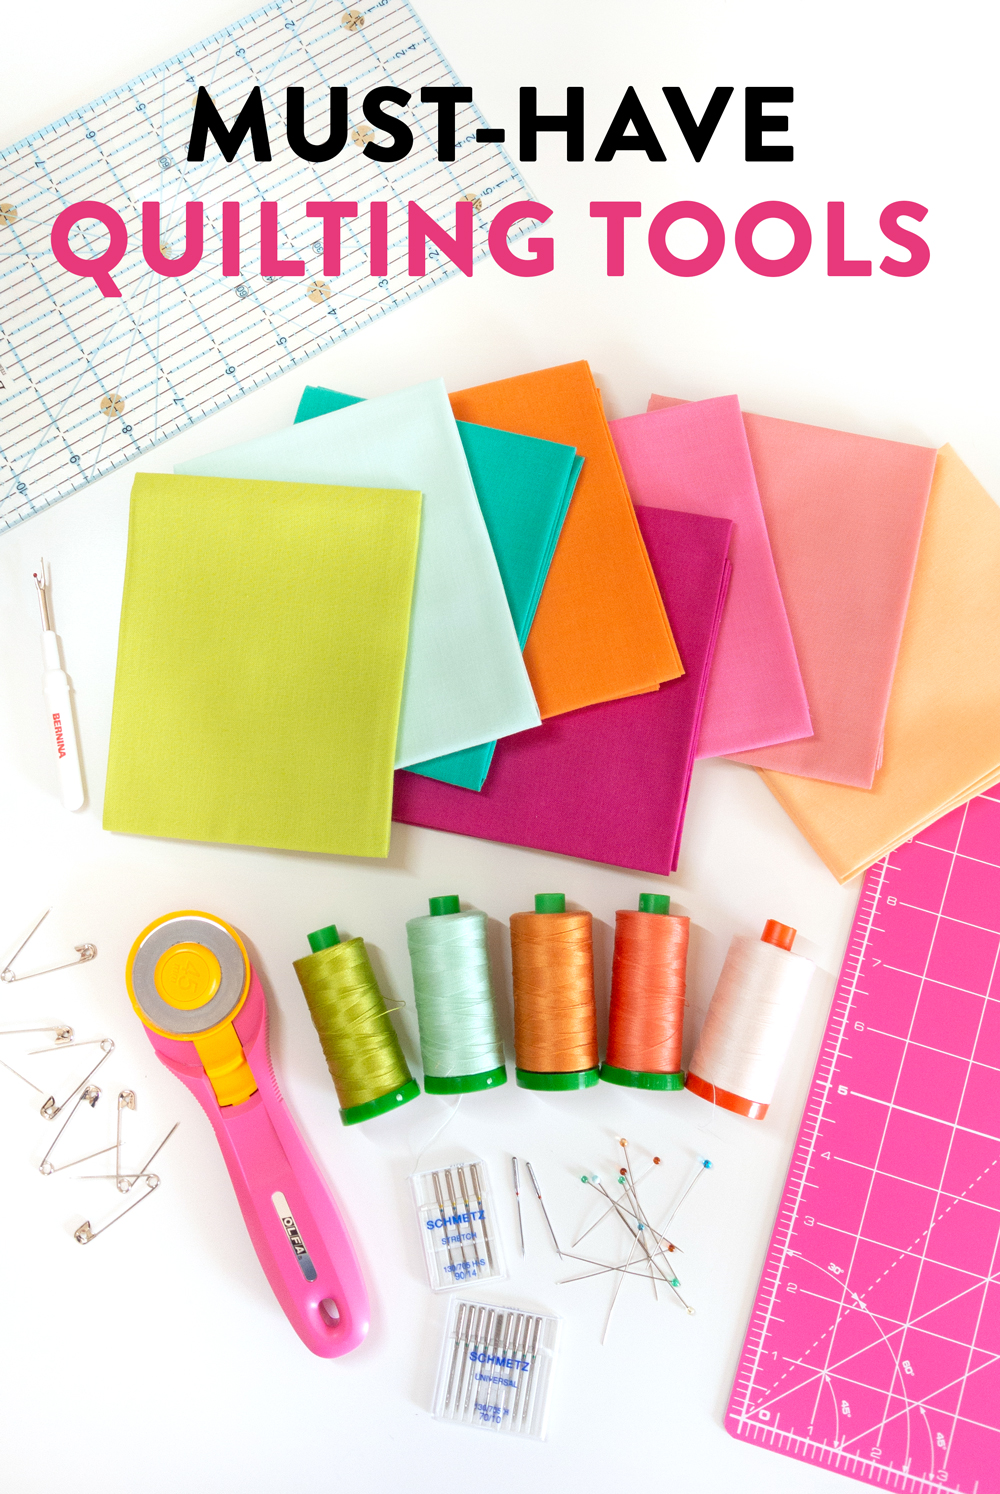 A checklist for the best must-have quilting tools. Great for beginners and also as gifts for quilters!